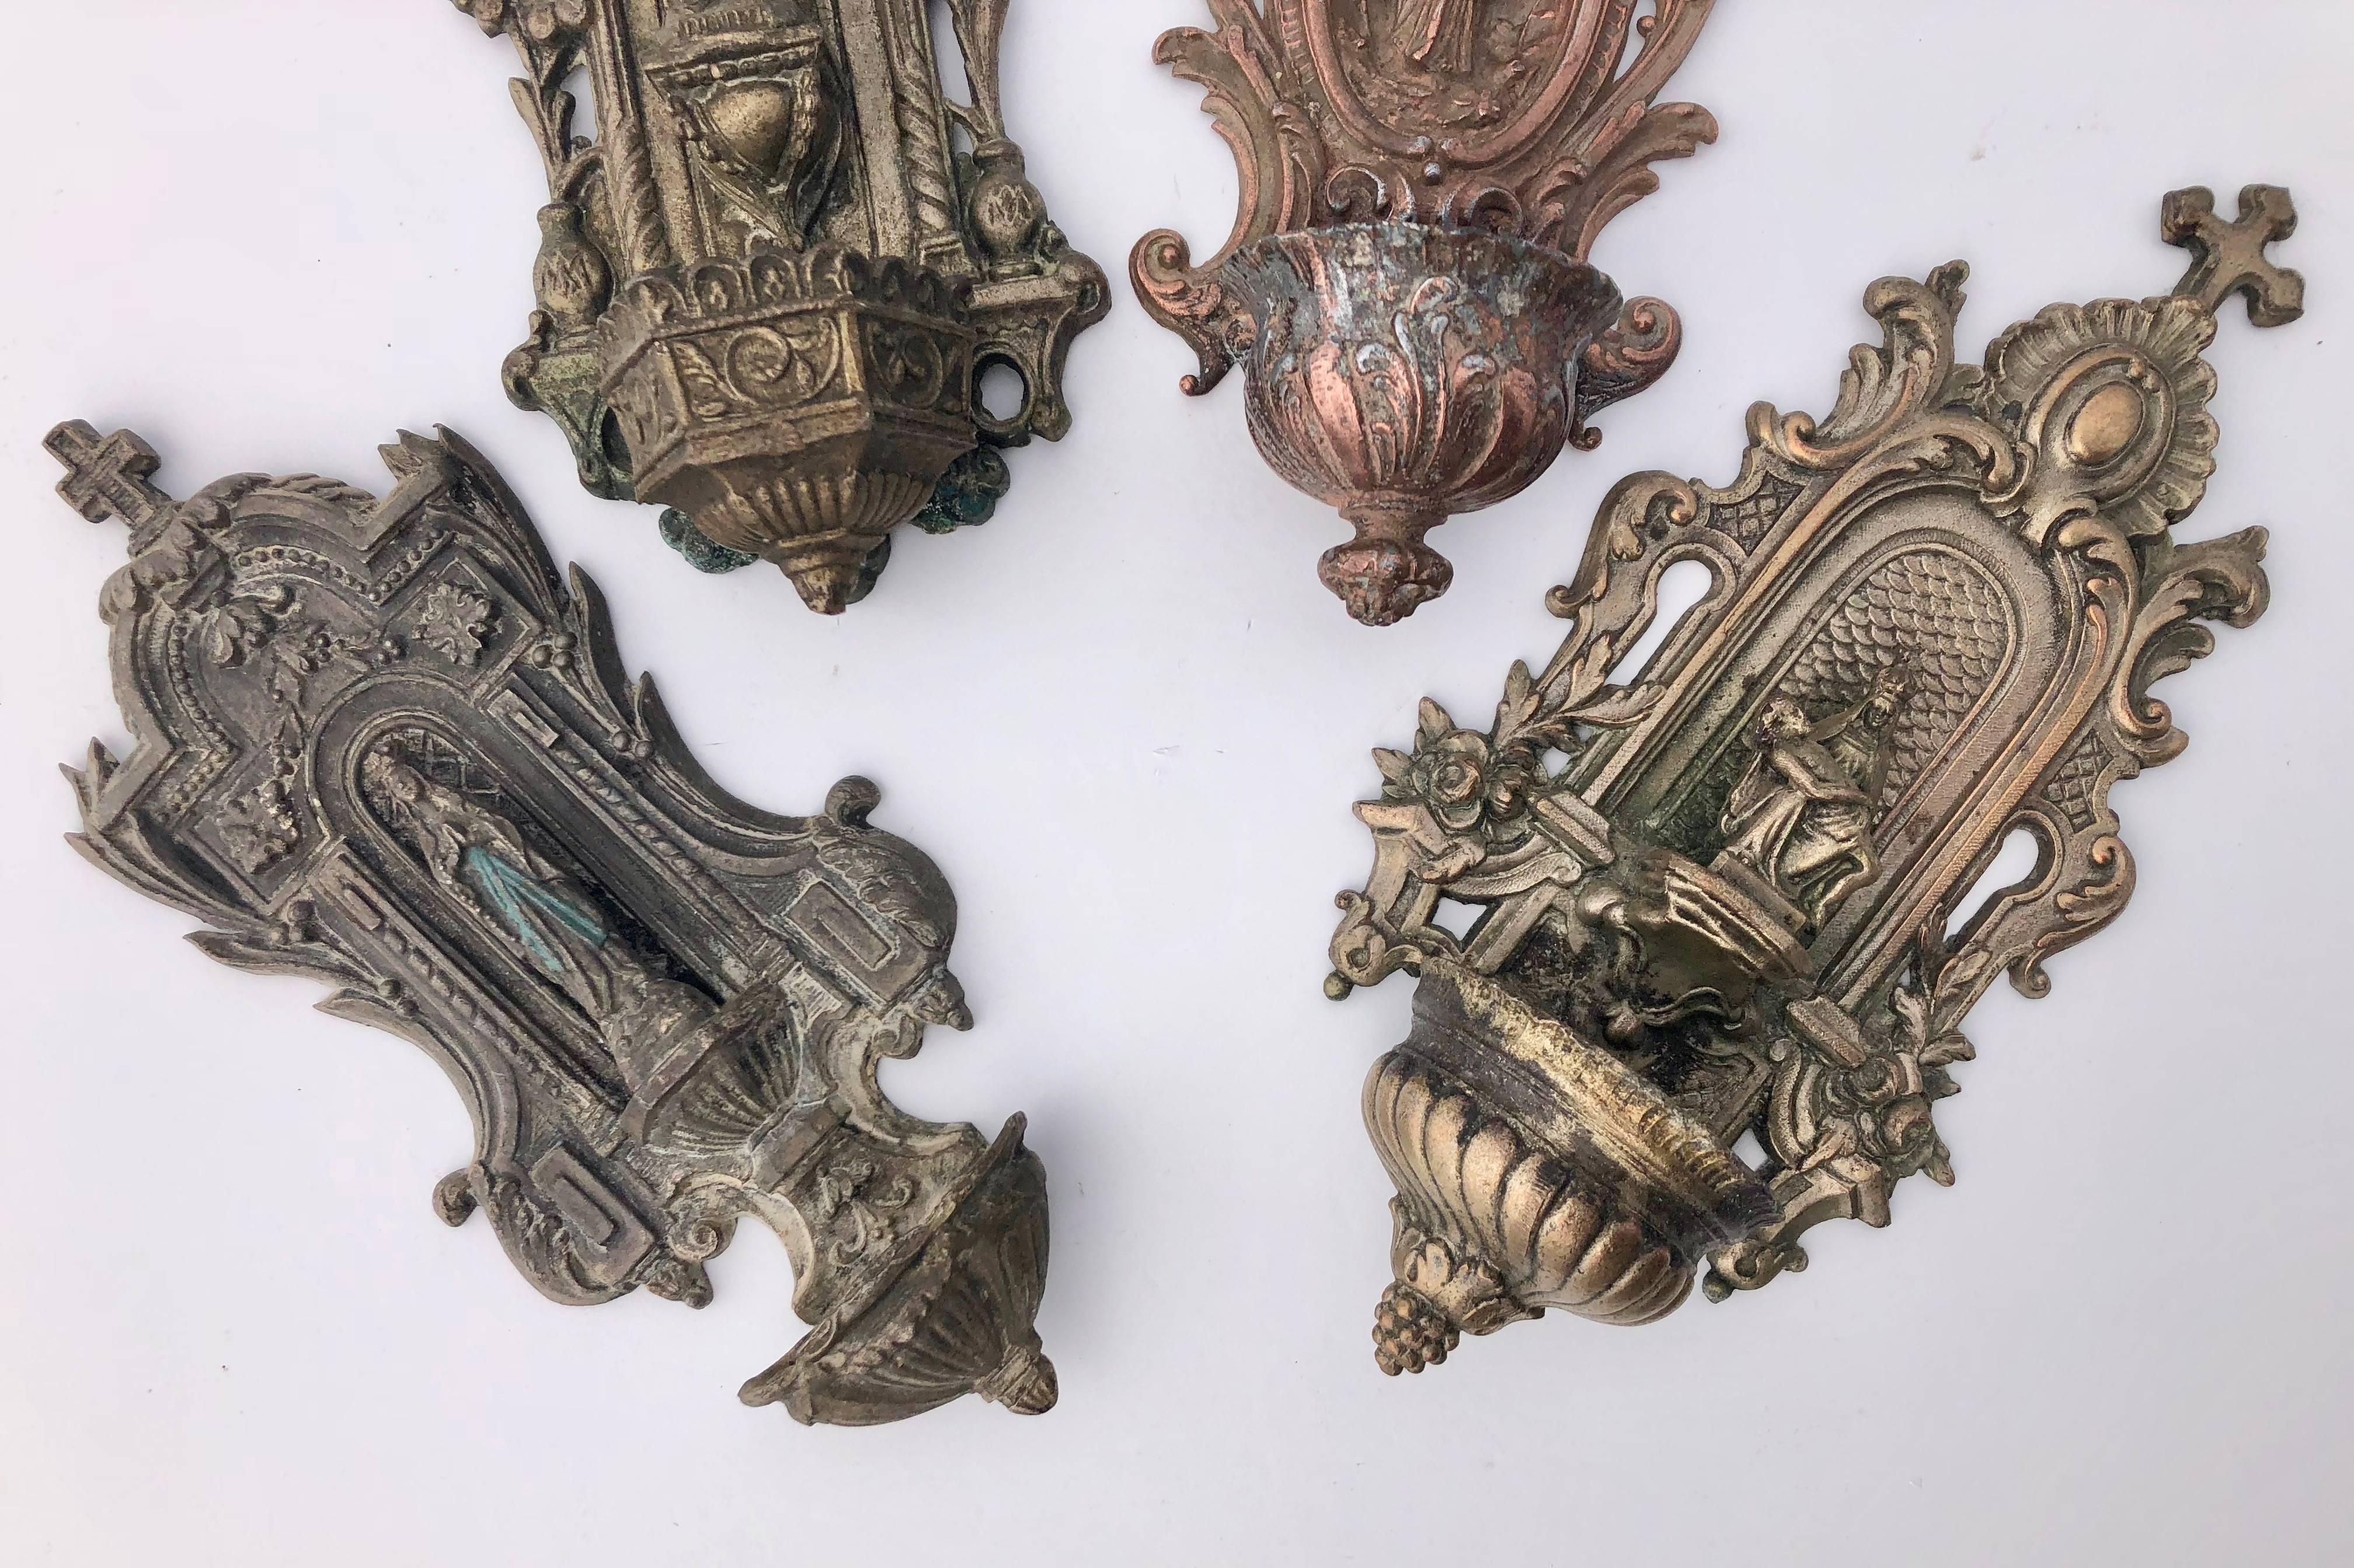 These beautiful French cast metal holy water fonts are all from the 1800s. Three of the benitiers feature Mary distributing graces while the fourth depicts Mary as 